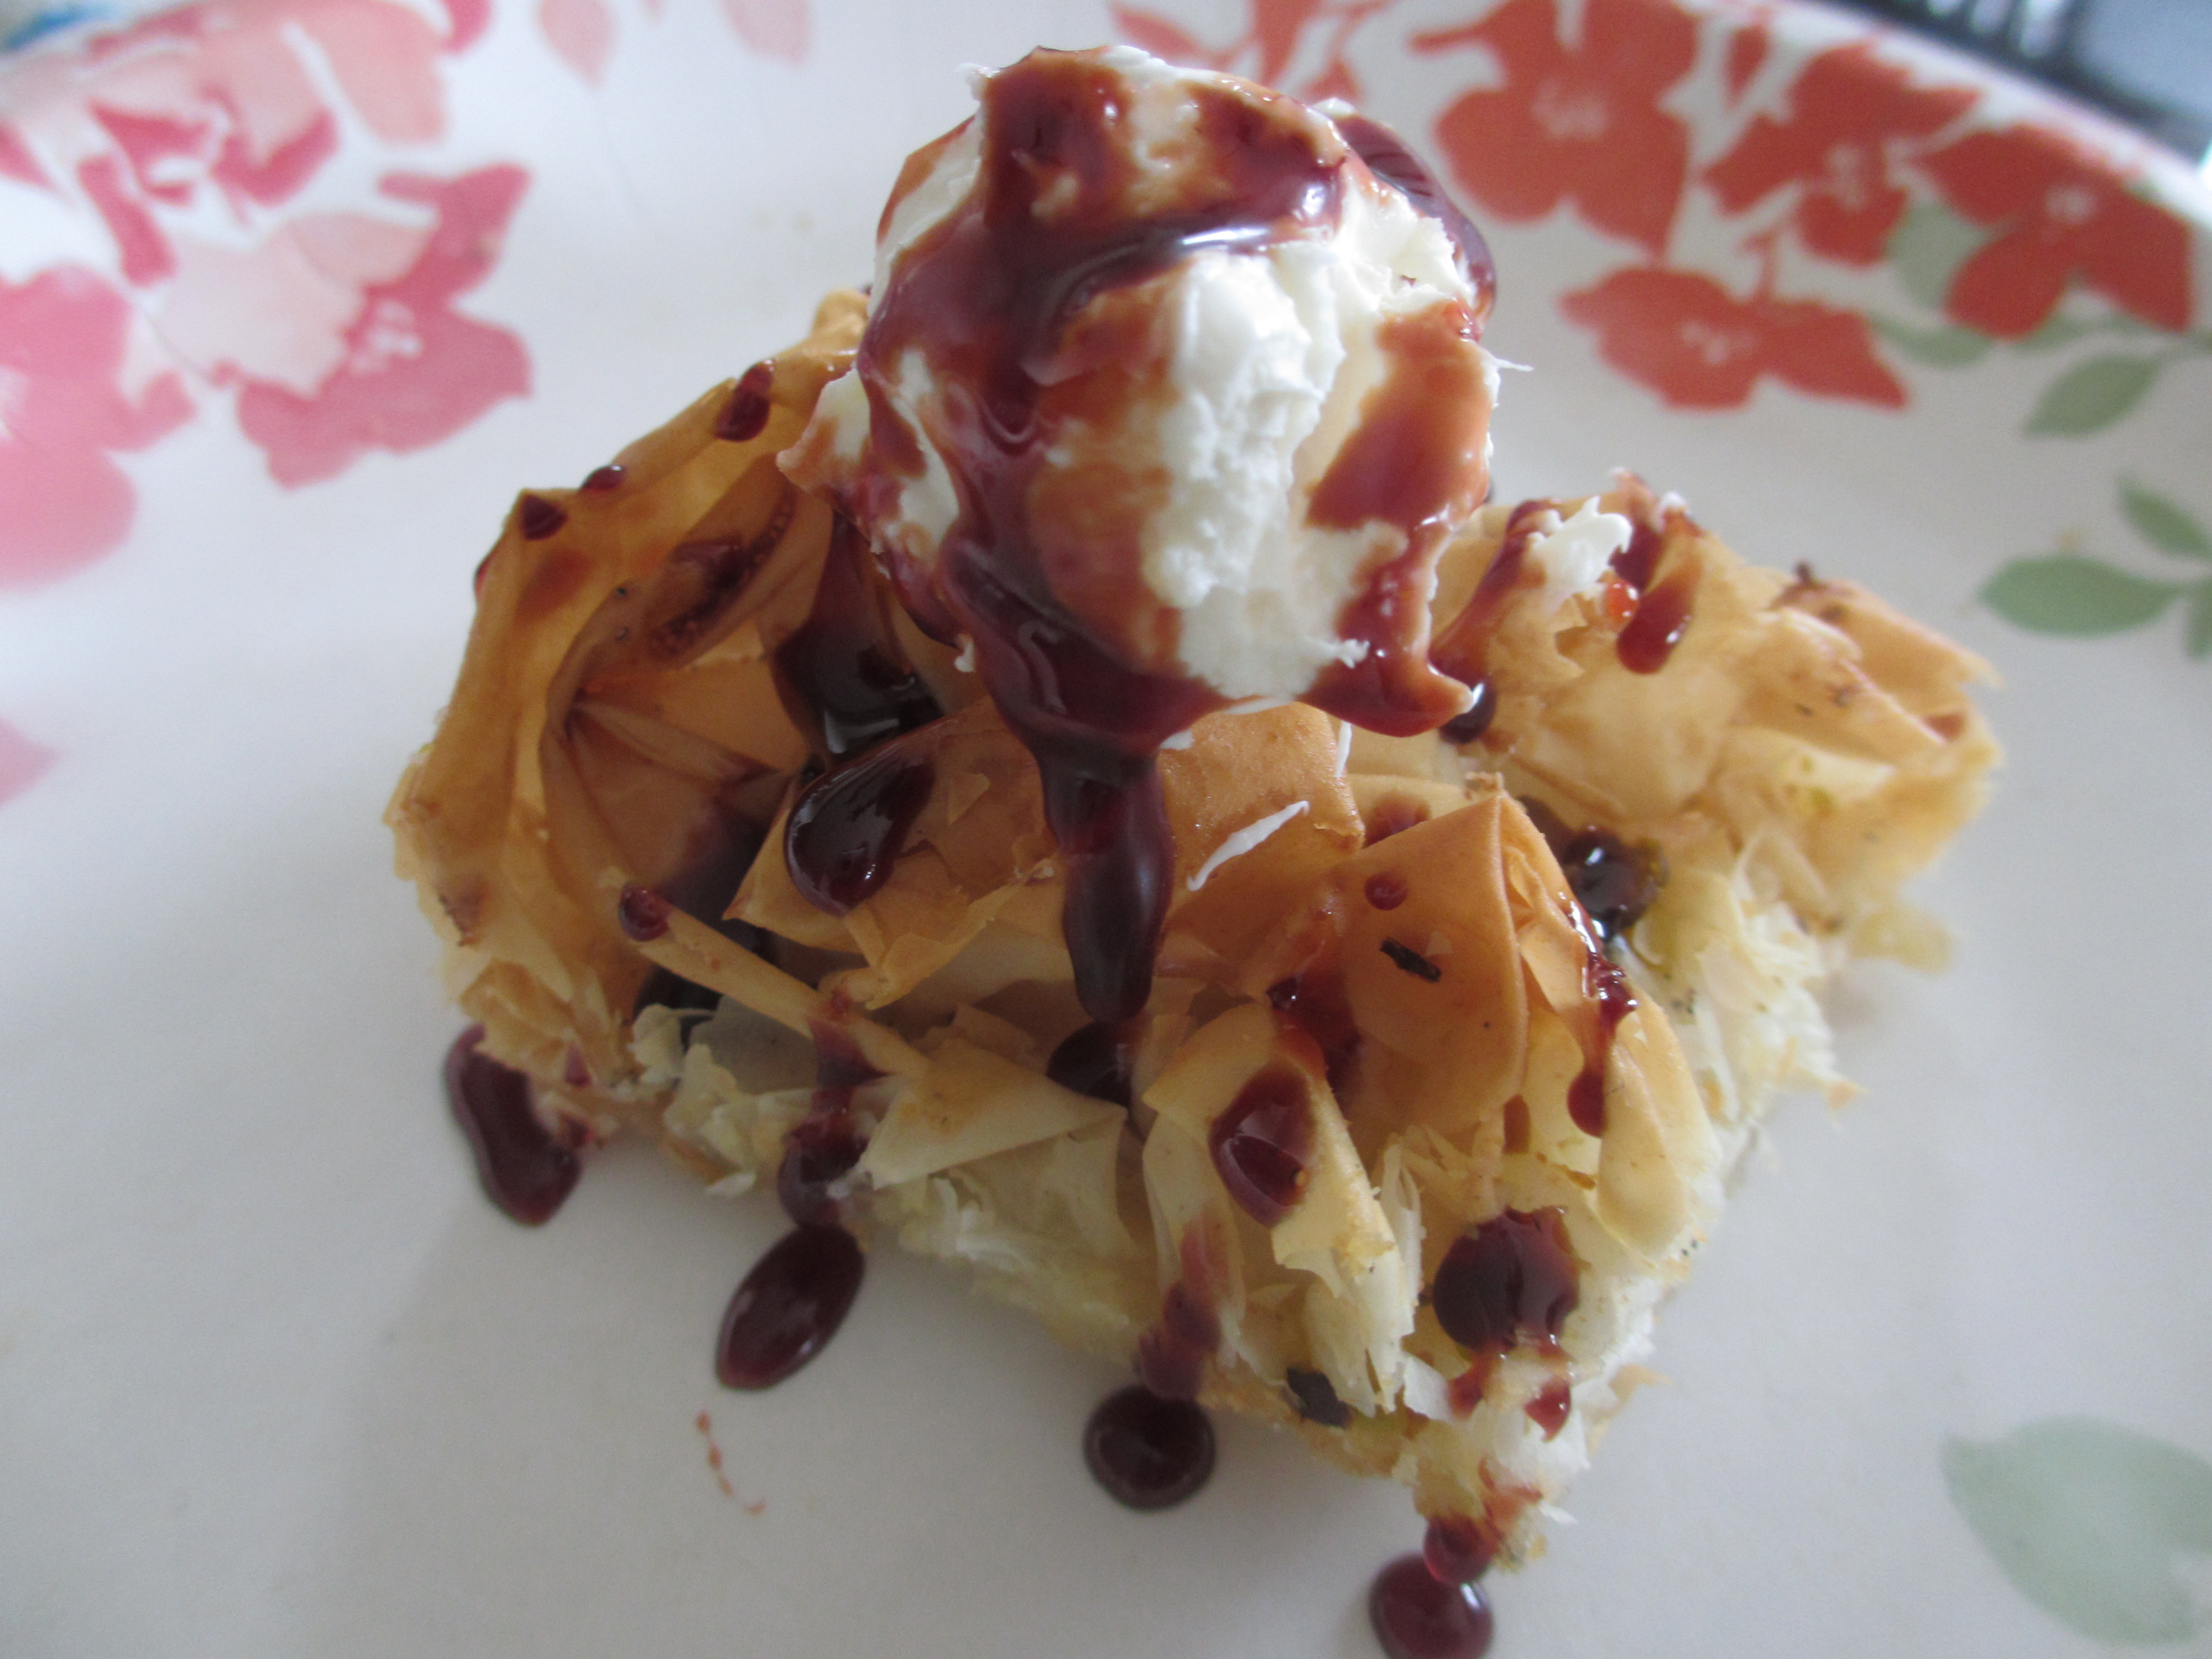 Muachaka with clotted cream and date syrup